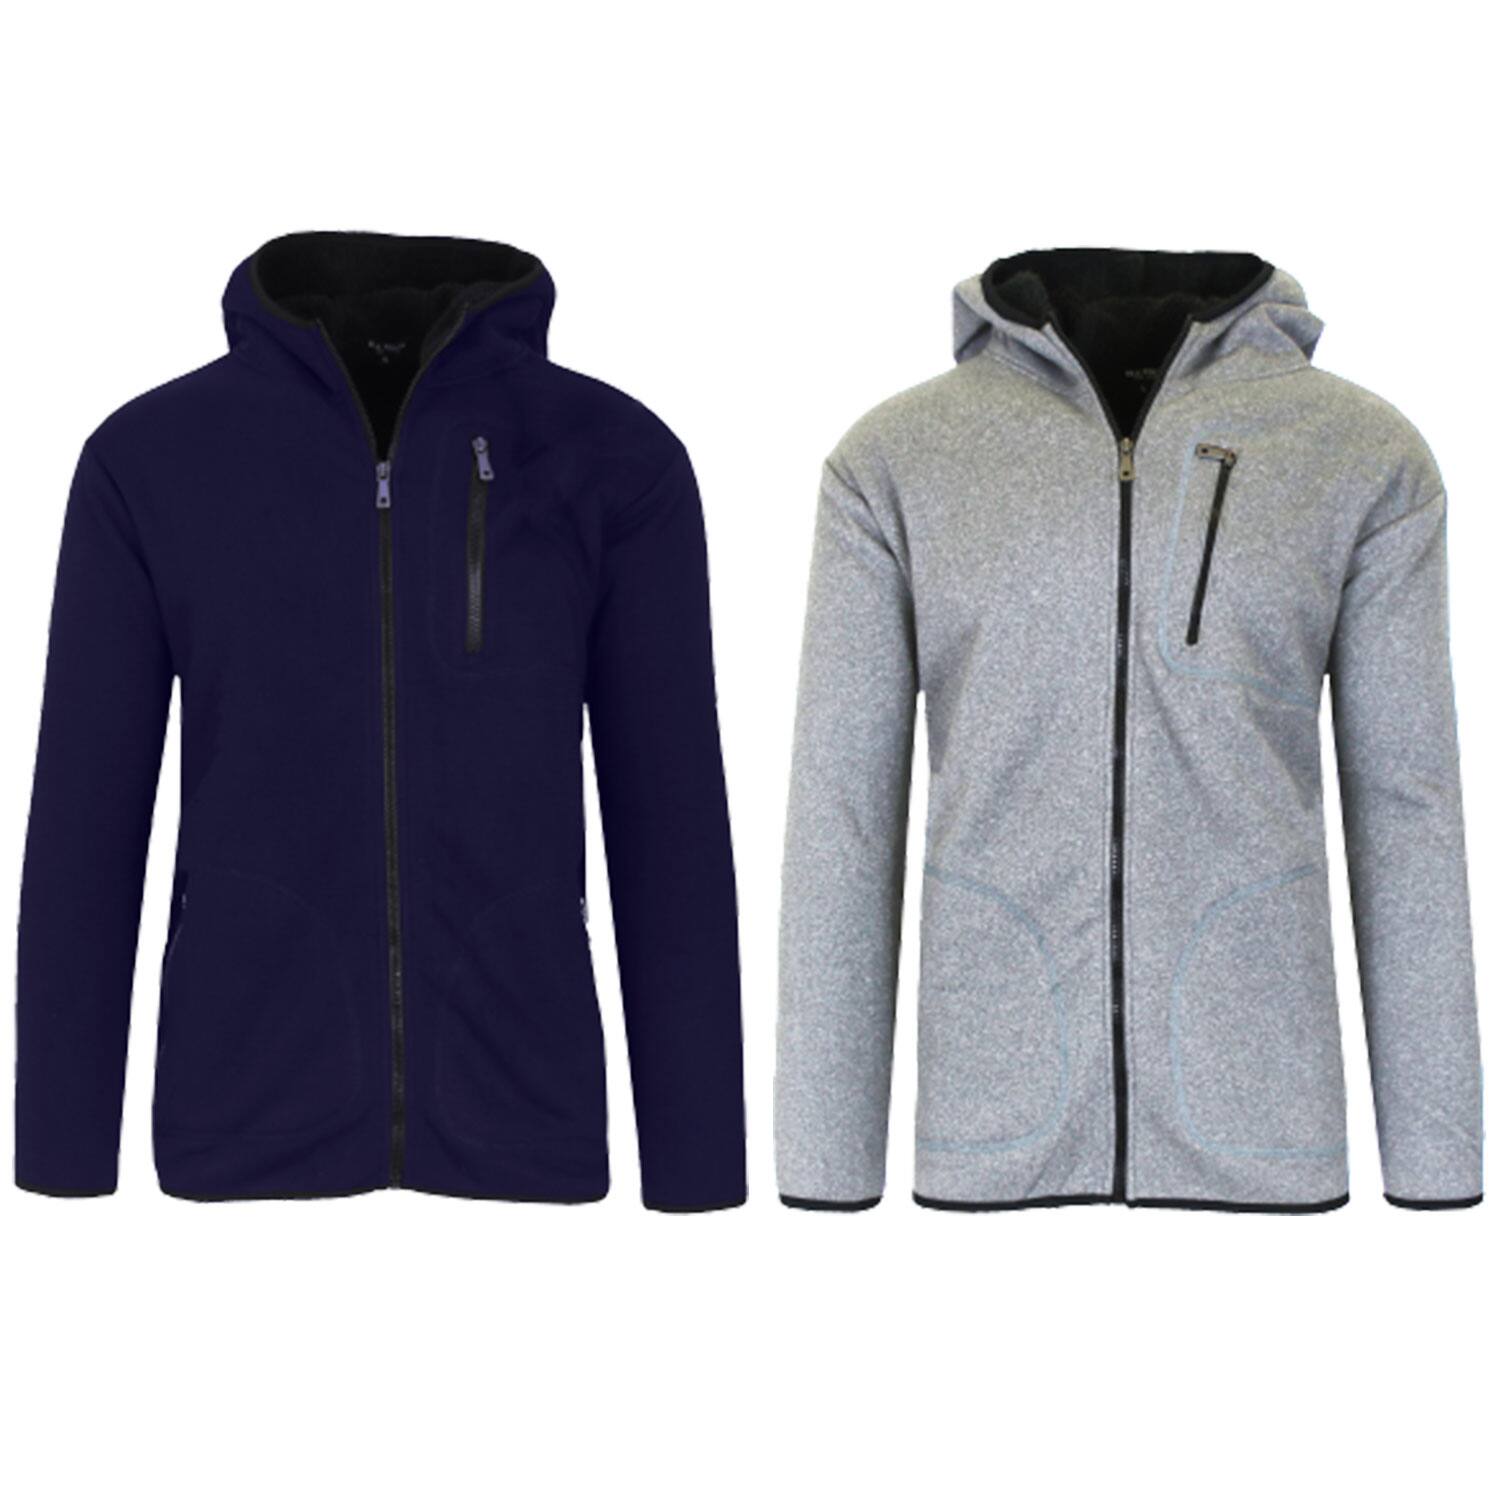 Men's Tech Sherpa Fleece-Lined Zip Hoodie With Chest Pocket Pack Of 2 $29.24+ Free shipping